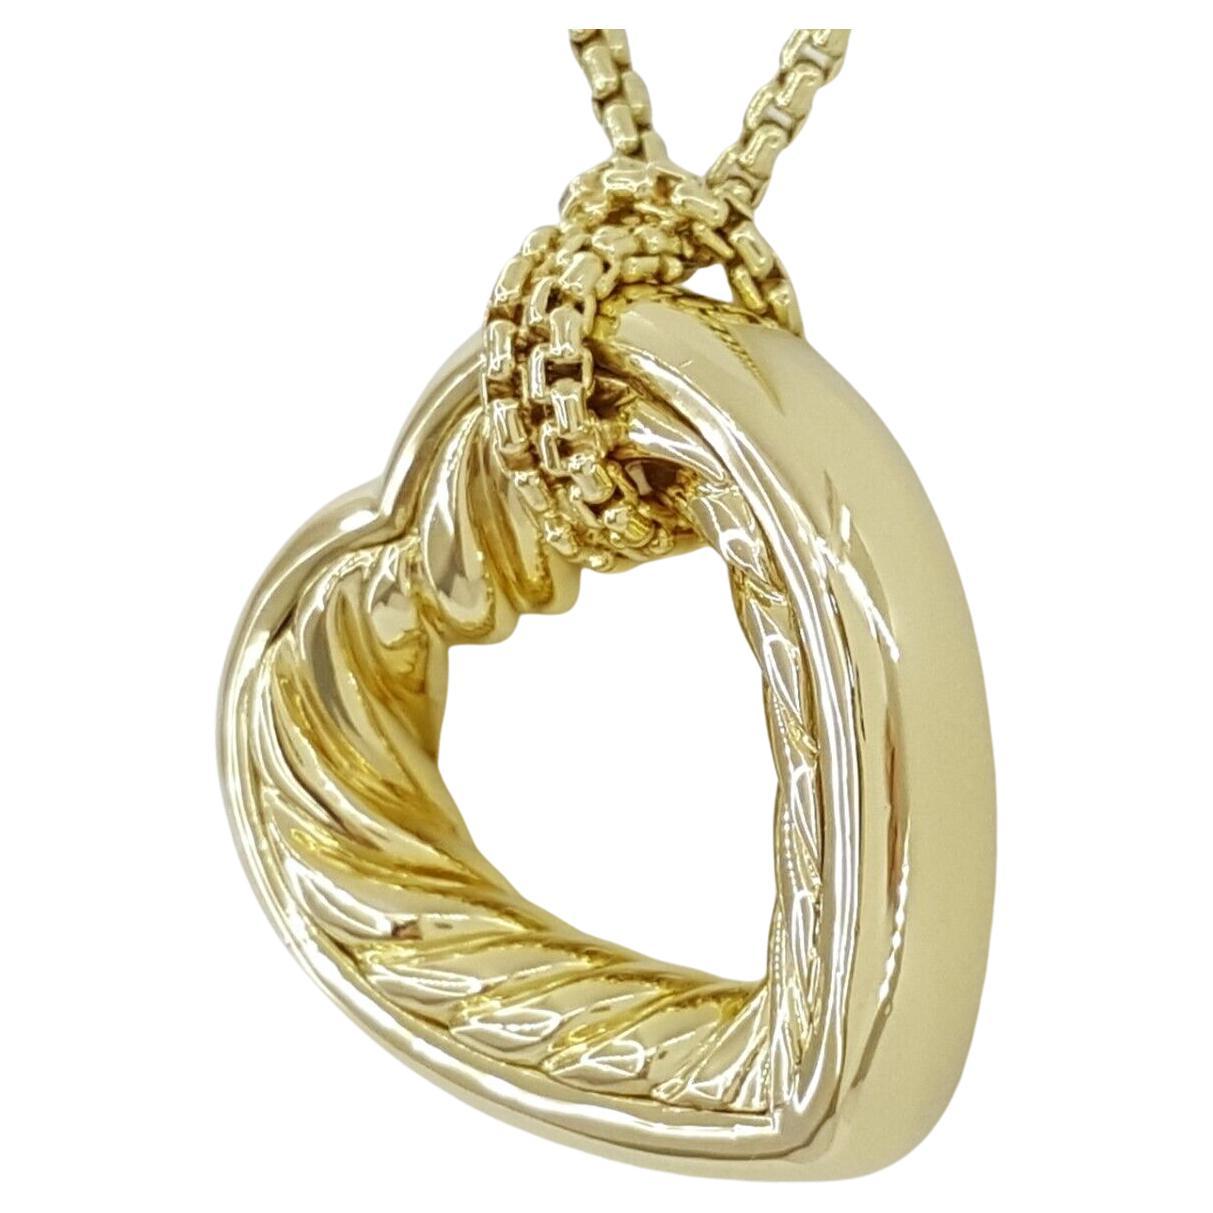 
This necklace features a David Yurman 18k Yellow Gold Heart Cable Pendant measuring 25 mm wide, accompanied by a 1.5 mm Round Box Link Chain spanning 20